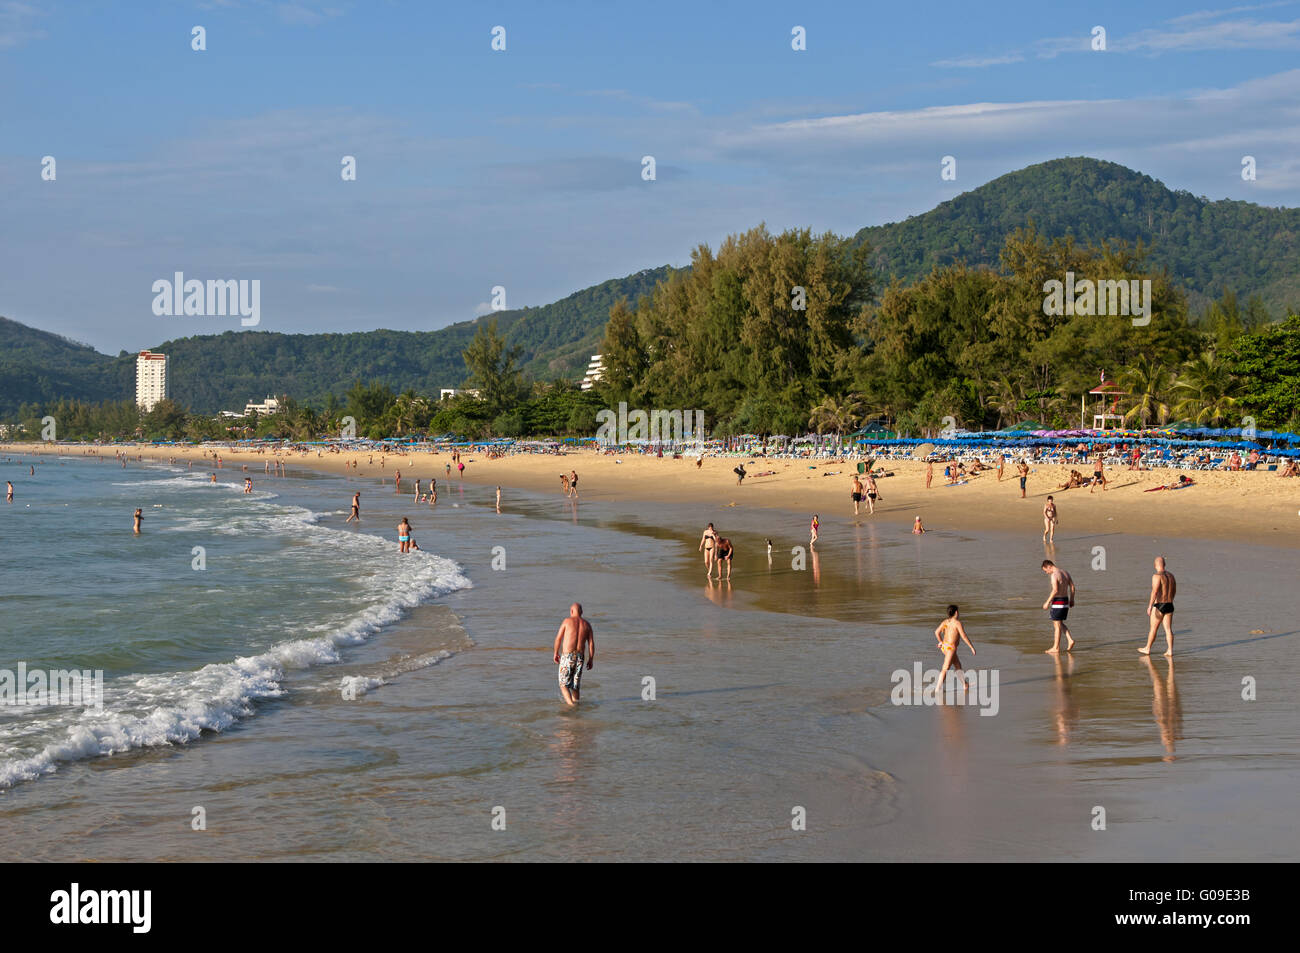 sandy beaches and turquoise waters at Karon Beach, Stock Photo